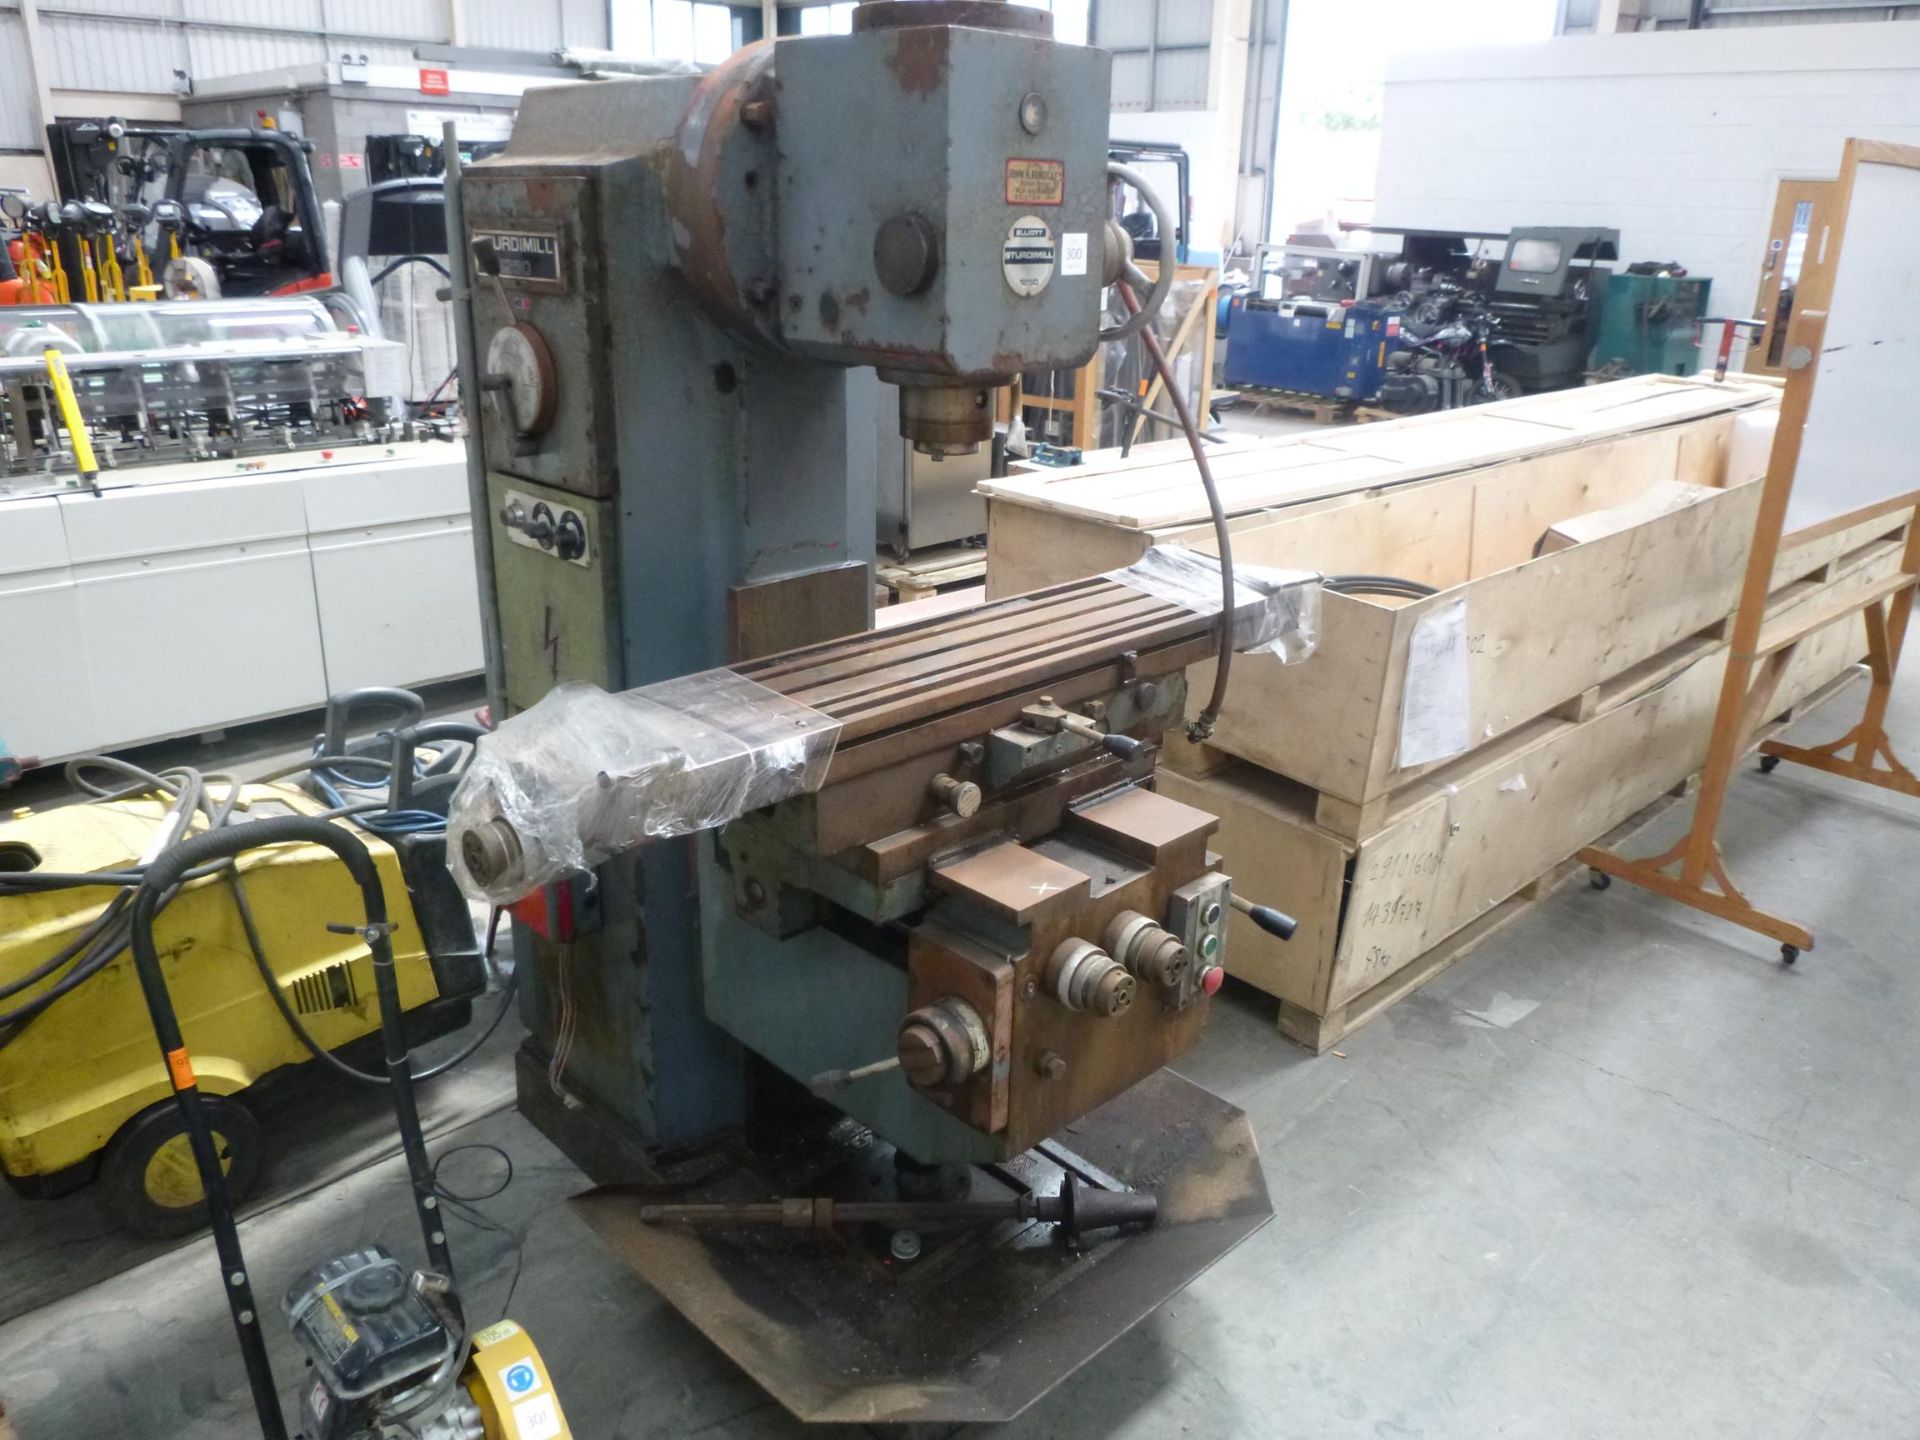 * An Elliot Sturdimill 1250 Milling Machine, S/N HQ13272 D4019202, 3PH. Please note there is a £20 - Image 3 of 3